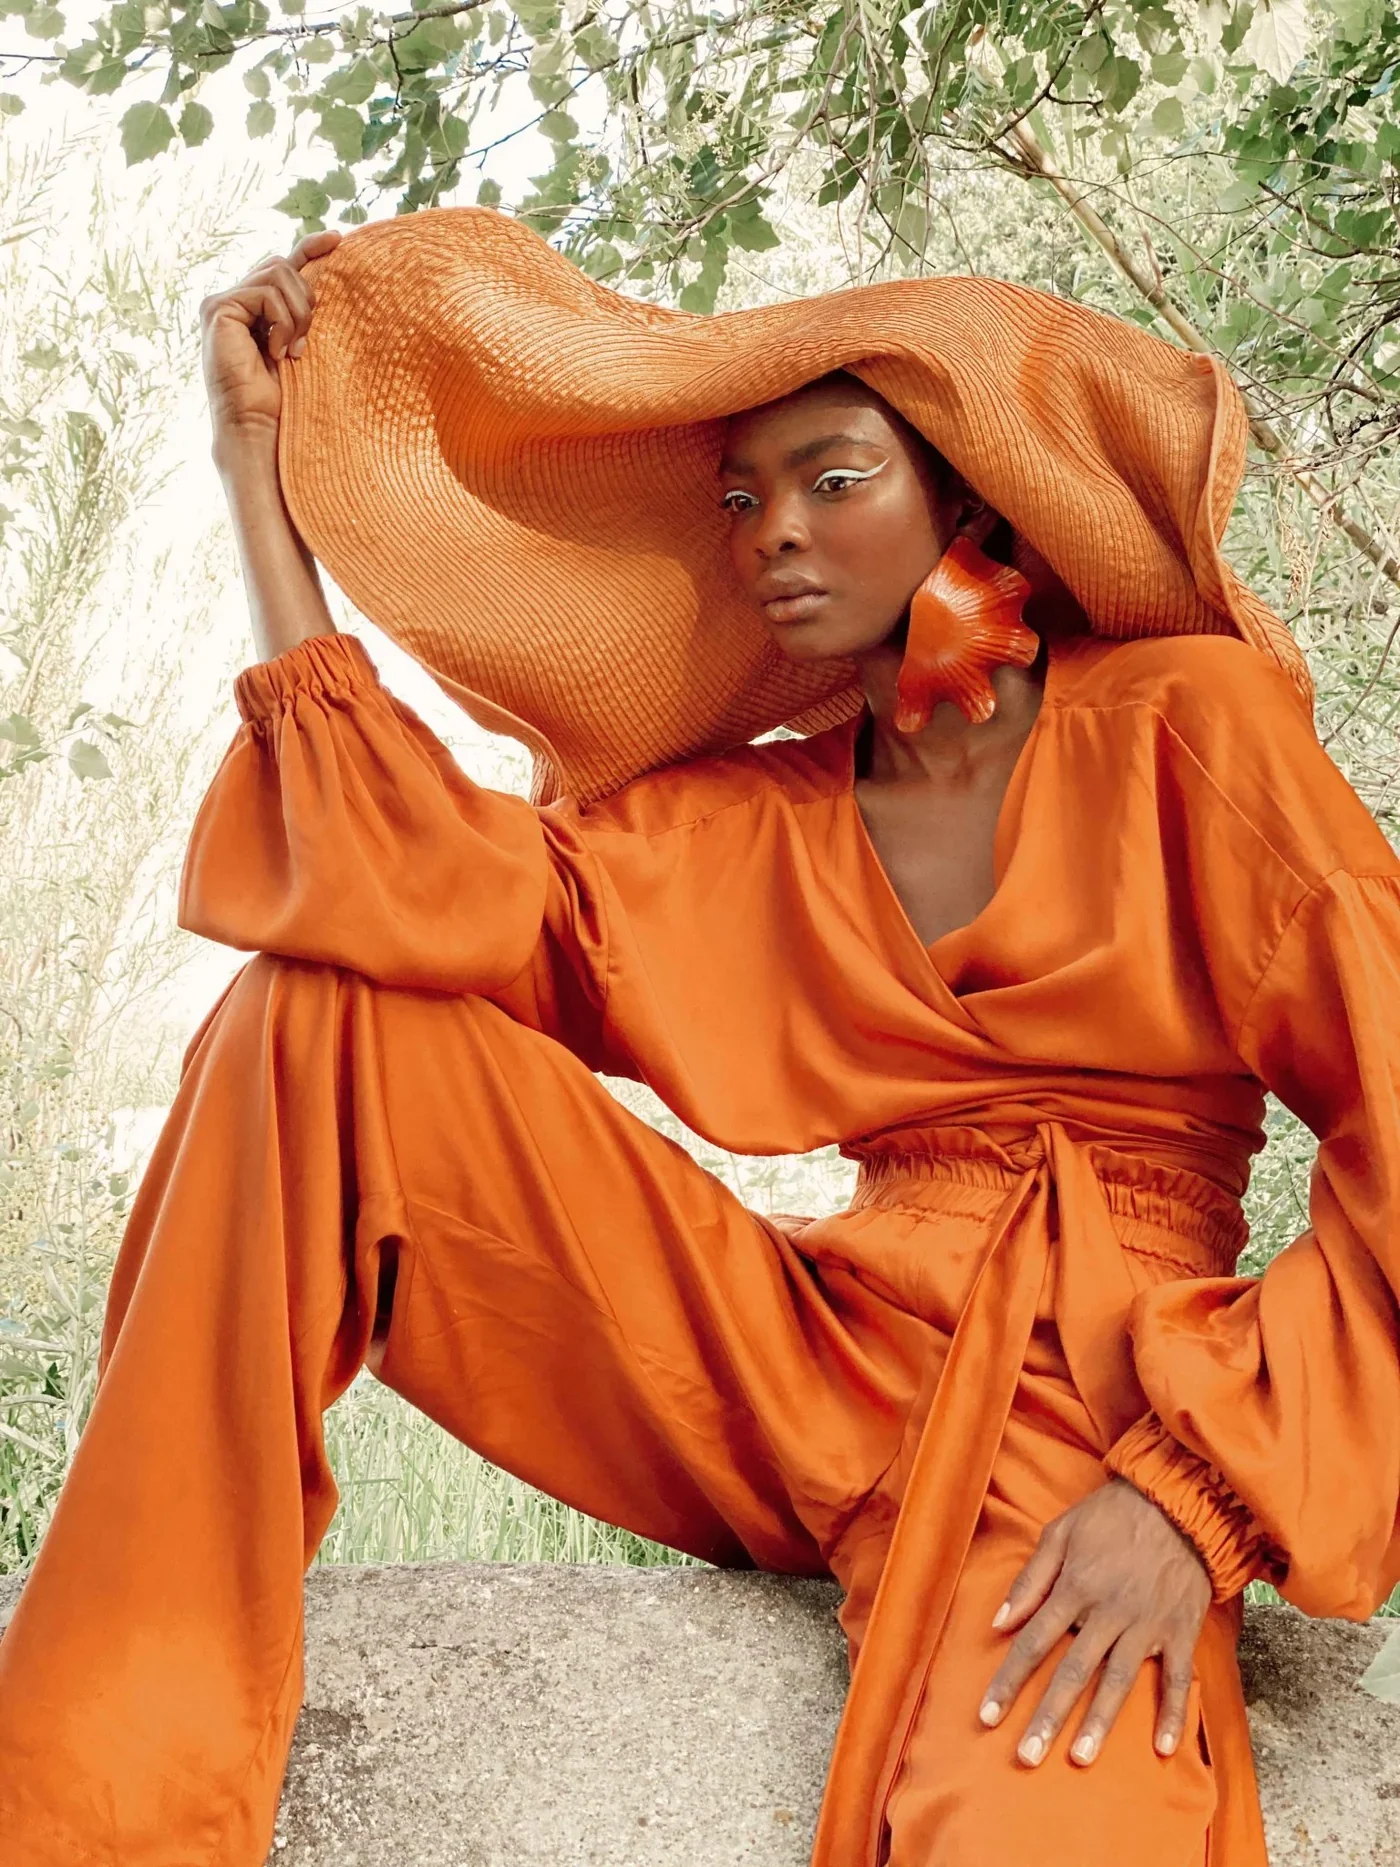 Six Black-Owned Fashion Brands You Need in Your Closet – Vitruvi